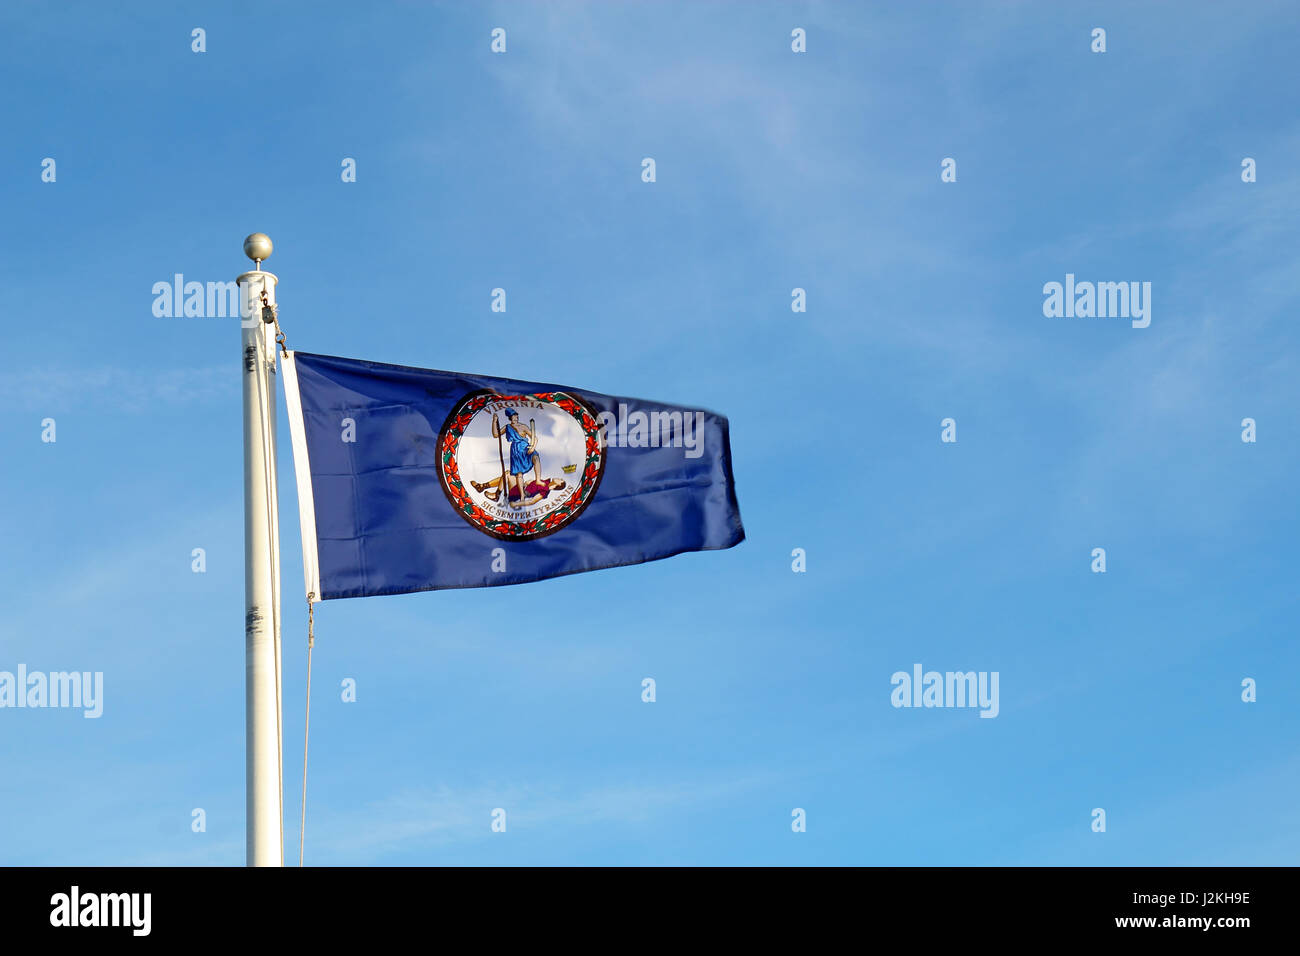 Flag of the Commonwealth of Virginia flying from a while pole against a bright blue sky and cirrus clouds background Stock Photo